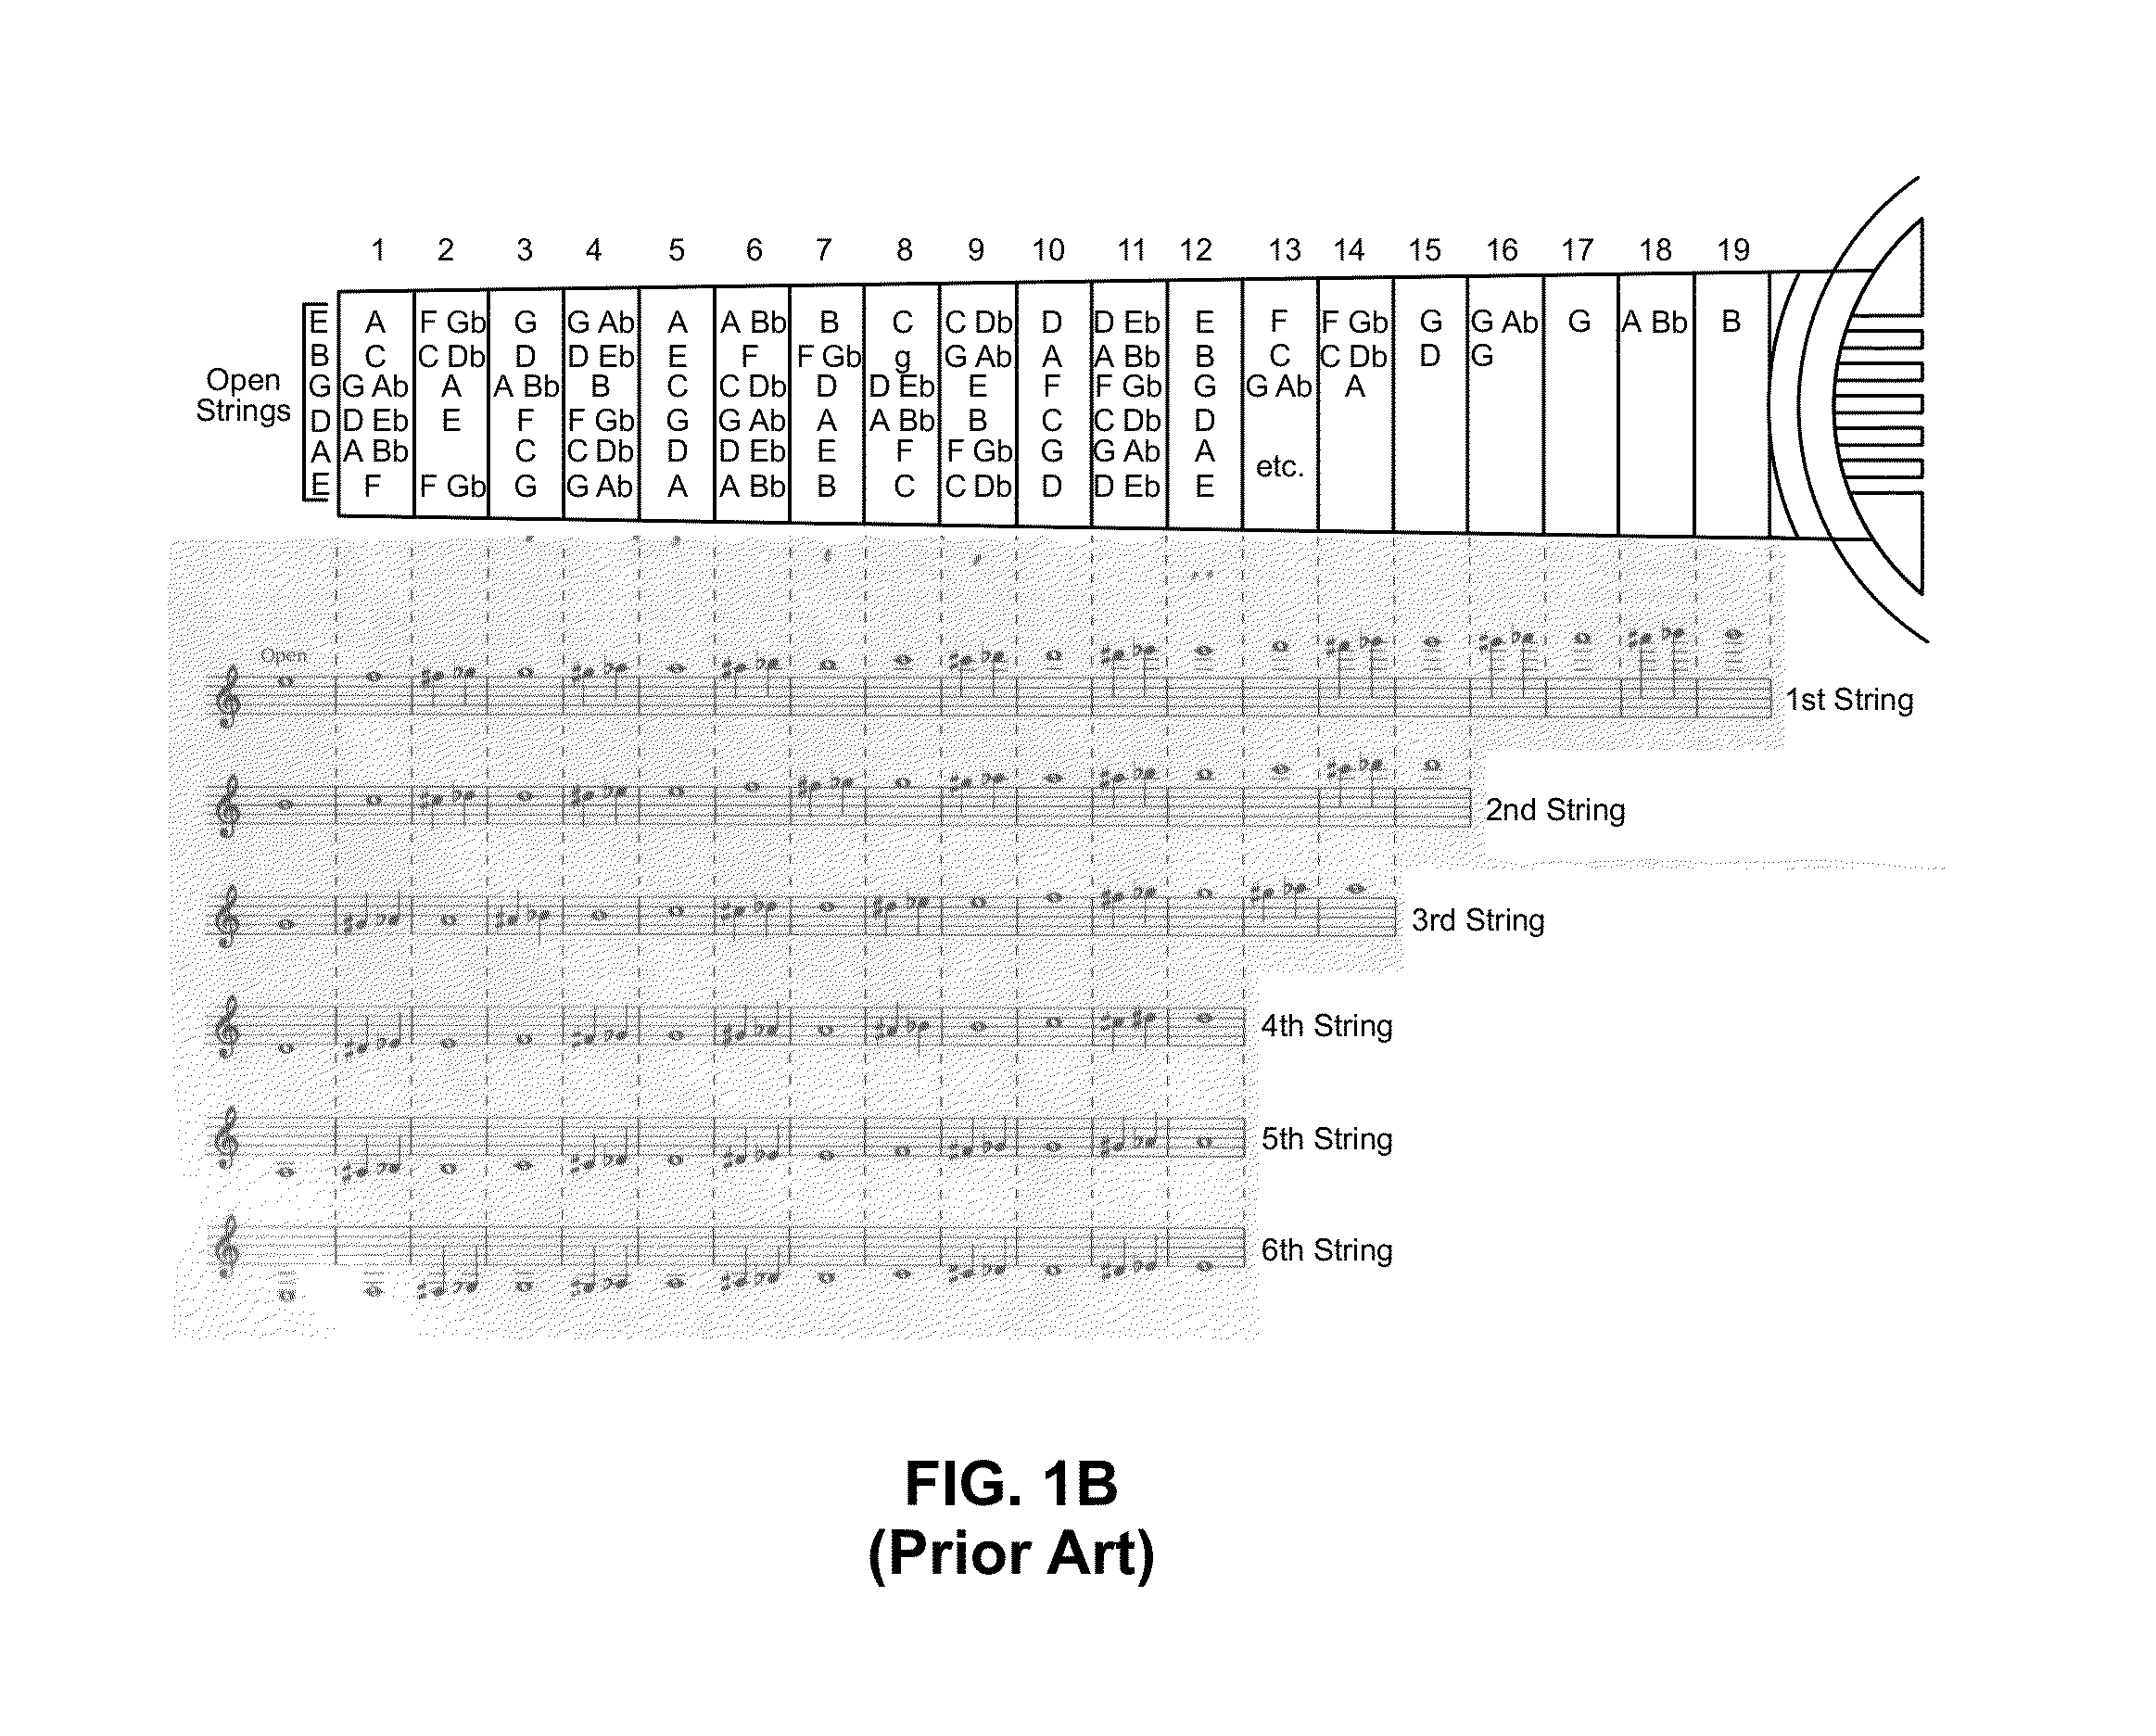 Musical notation systems for guitar fretboard, visual displays thereof, and uses thereof